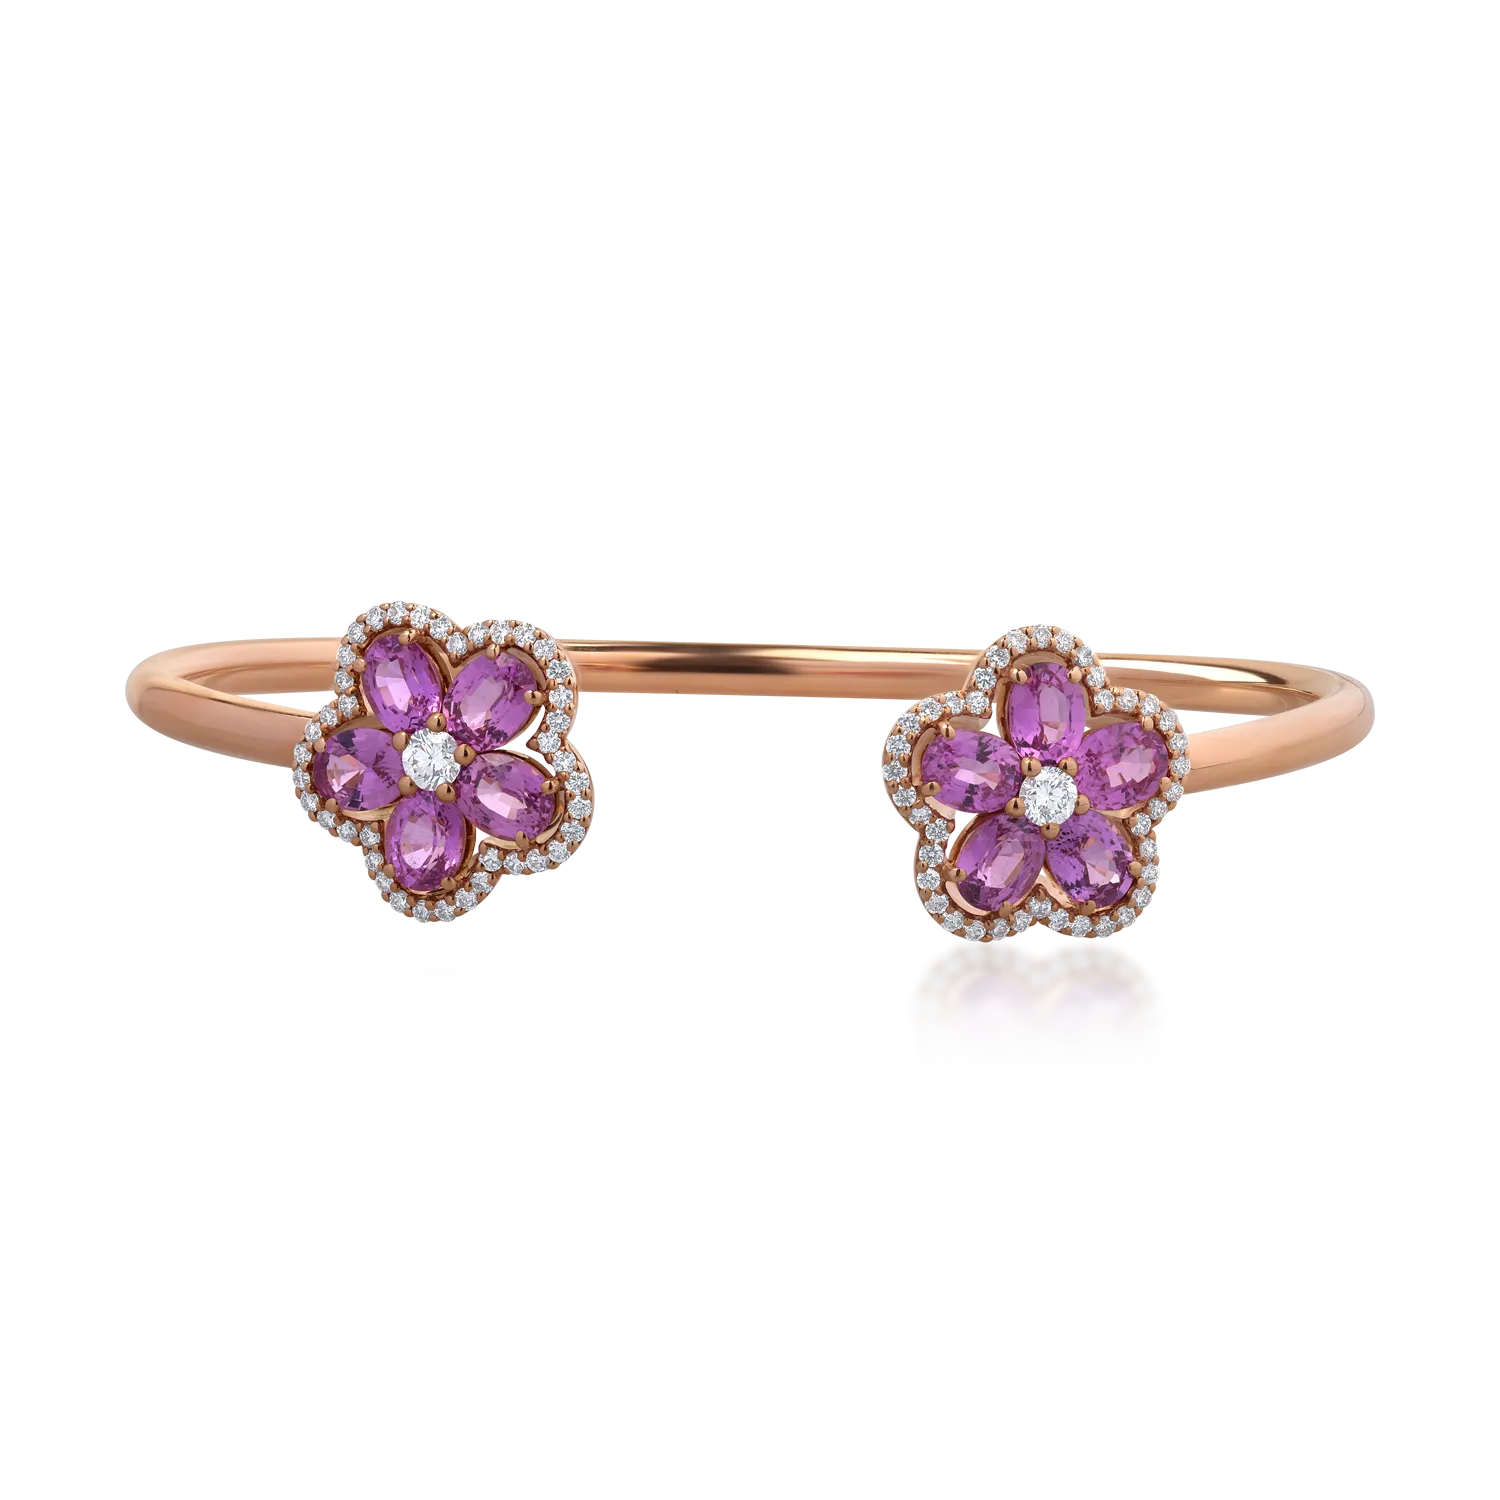 18K rose gold bracelet with 4.88ct rose sapphires and 0.74ct diamonds